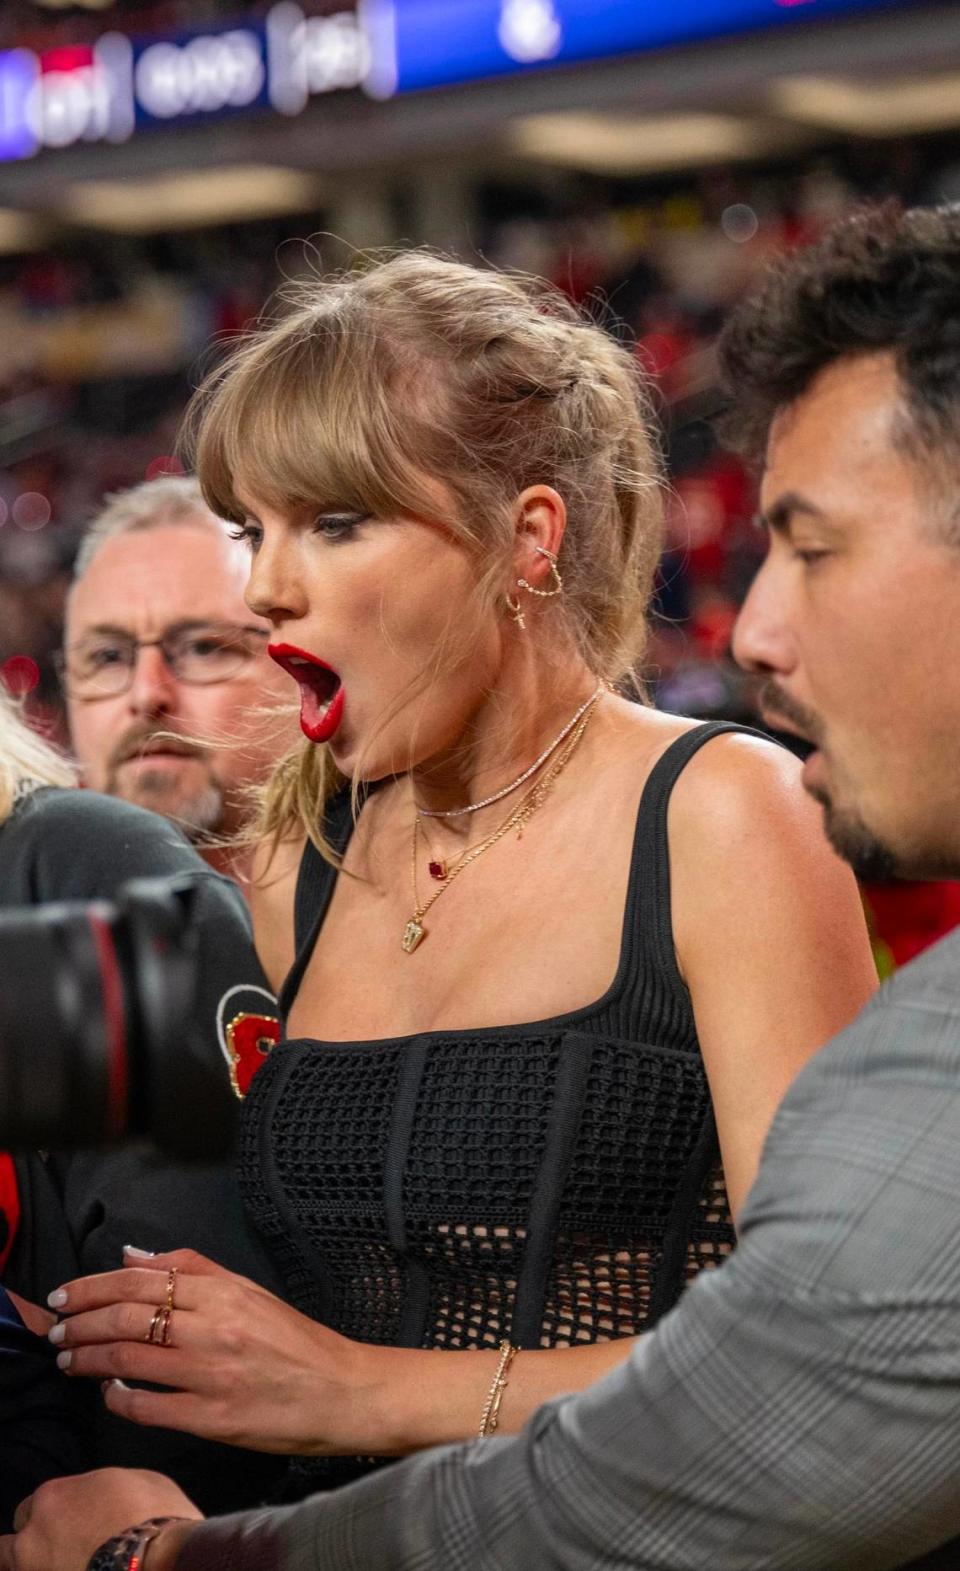 A closer look at the rubies and diamonds around Taylor Swift’s neck at the Super Bowl Sunday.